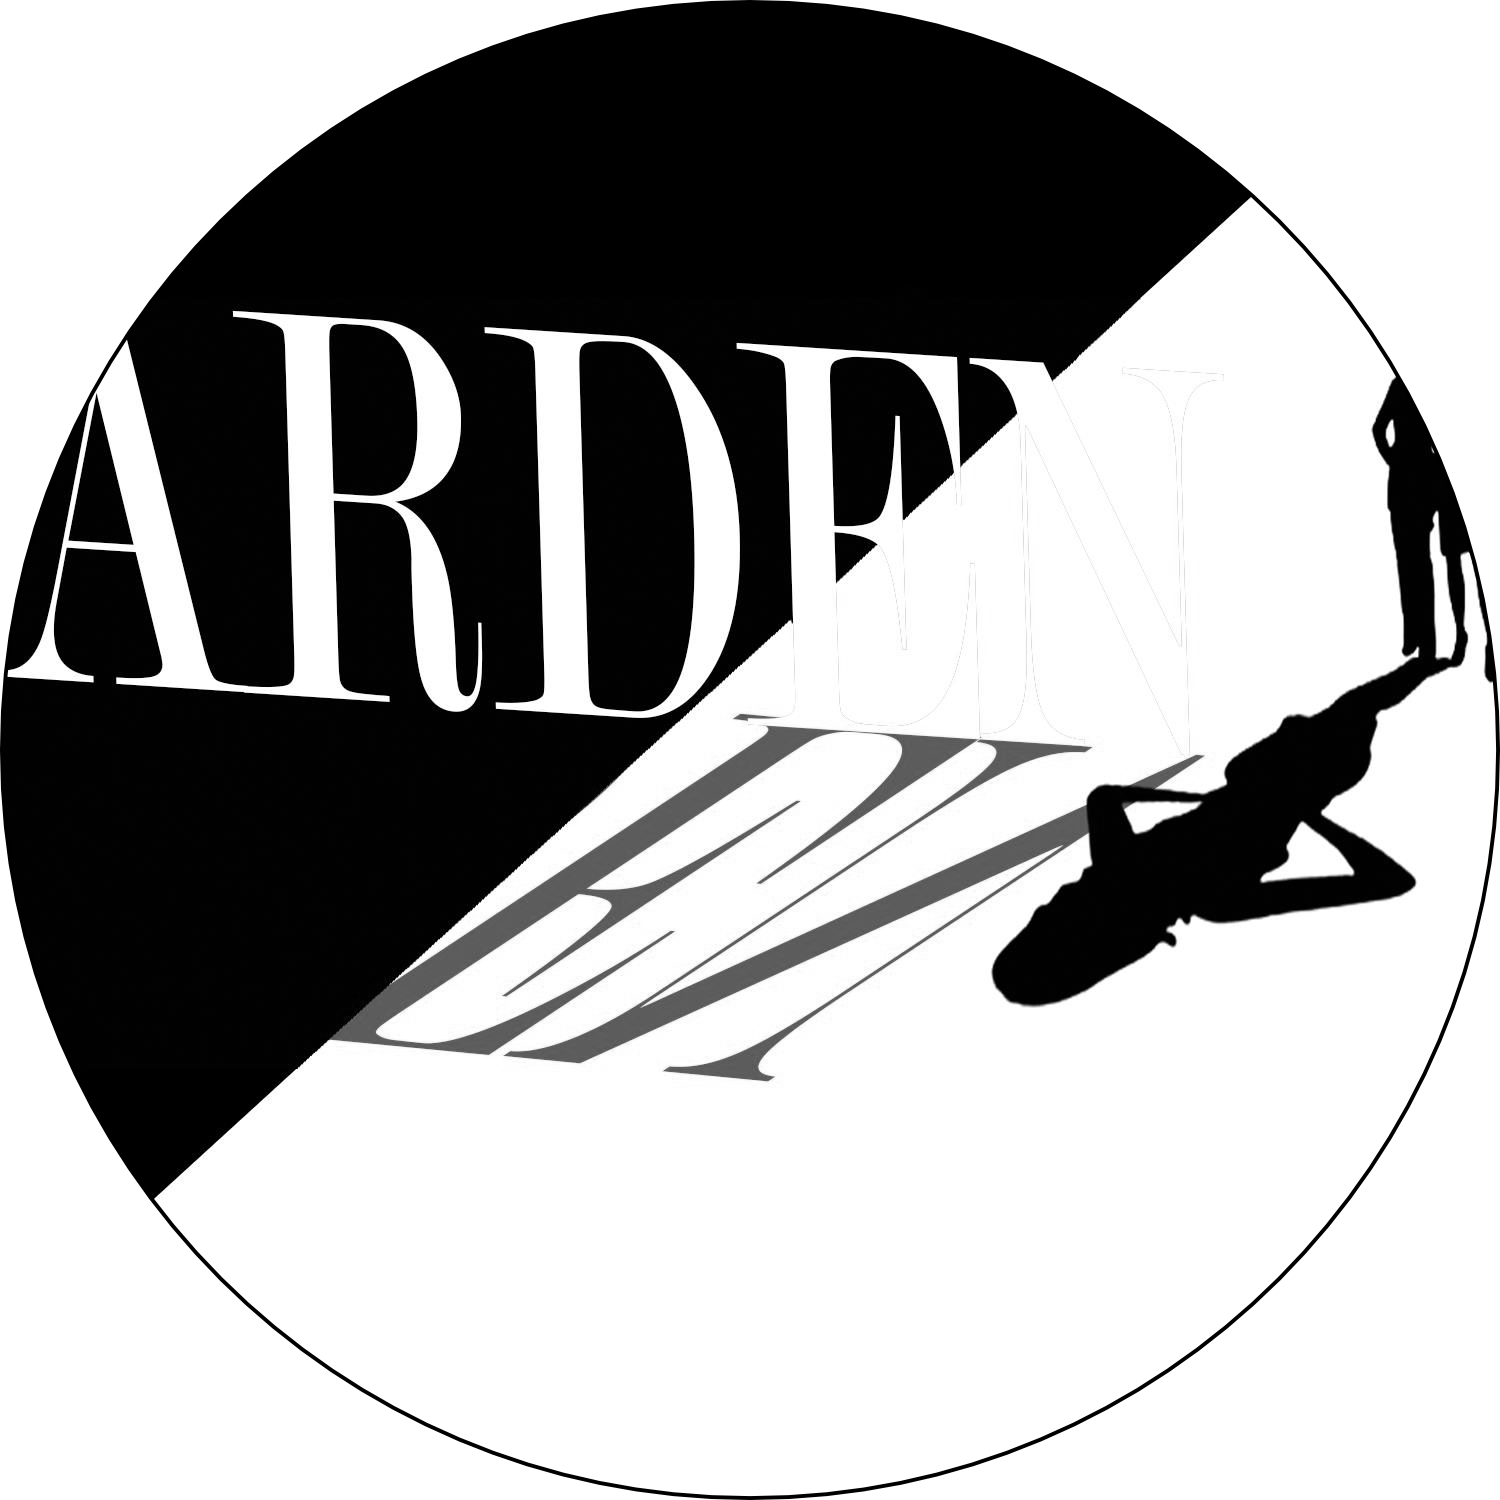 An Interview with the Creators of "Arden"